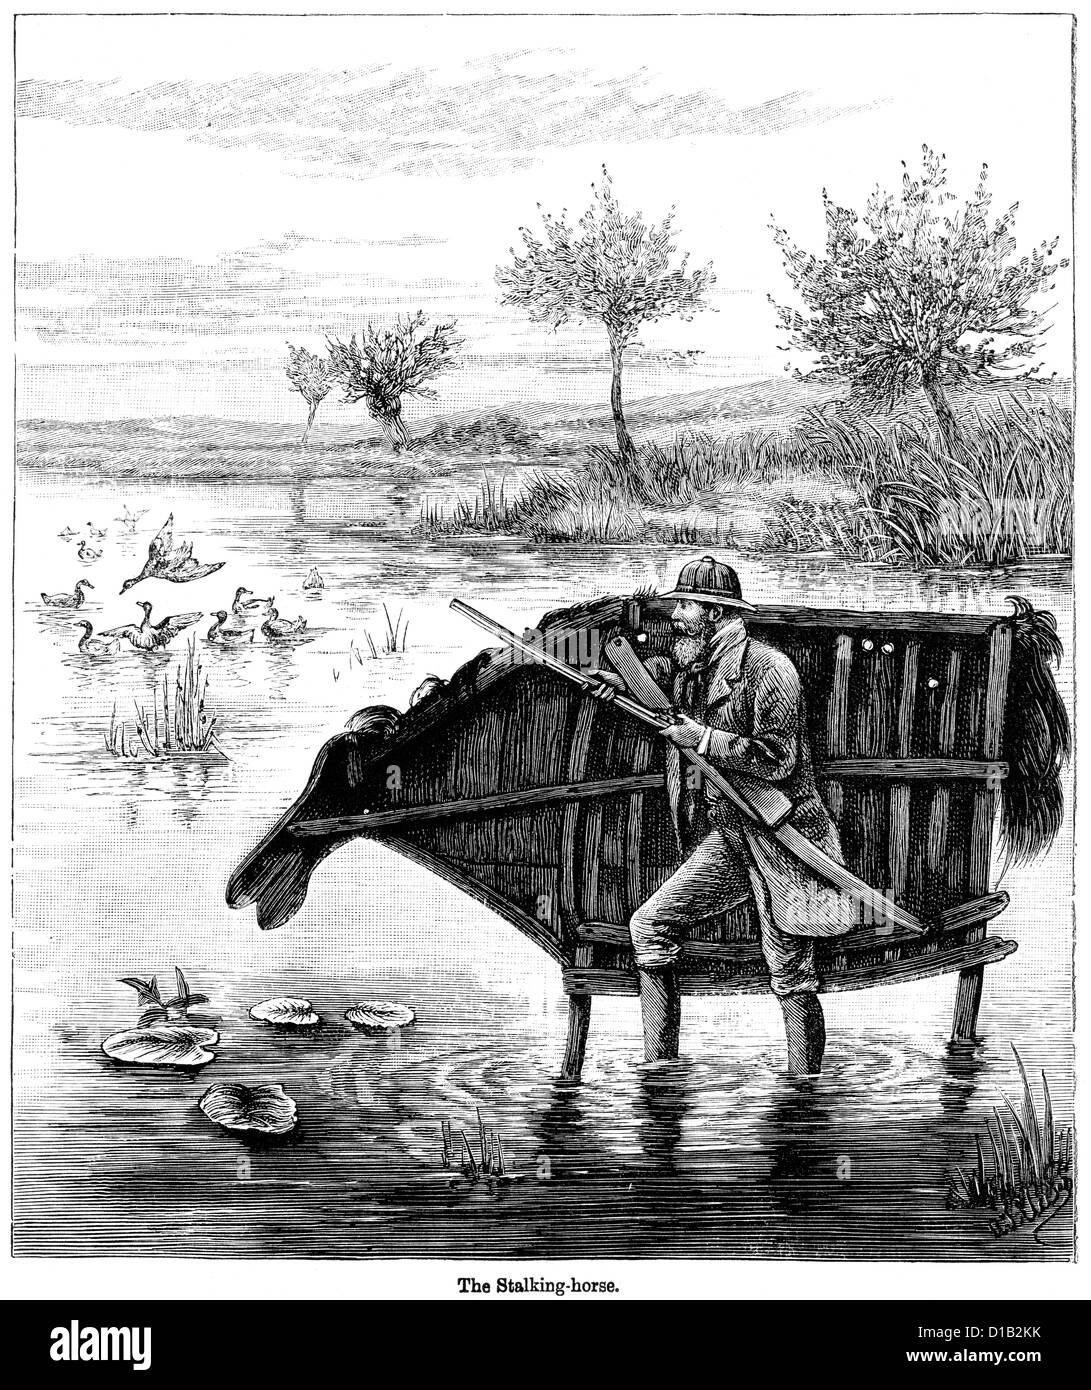 victorian-engraving-of-a-man-hunting-wild-duck-with-the-use-of-a-stalking-D1B2KK.jpg